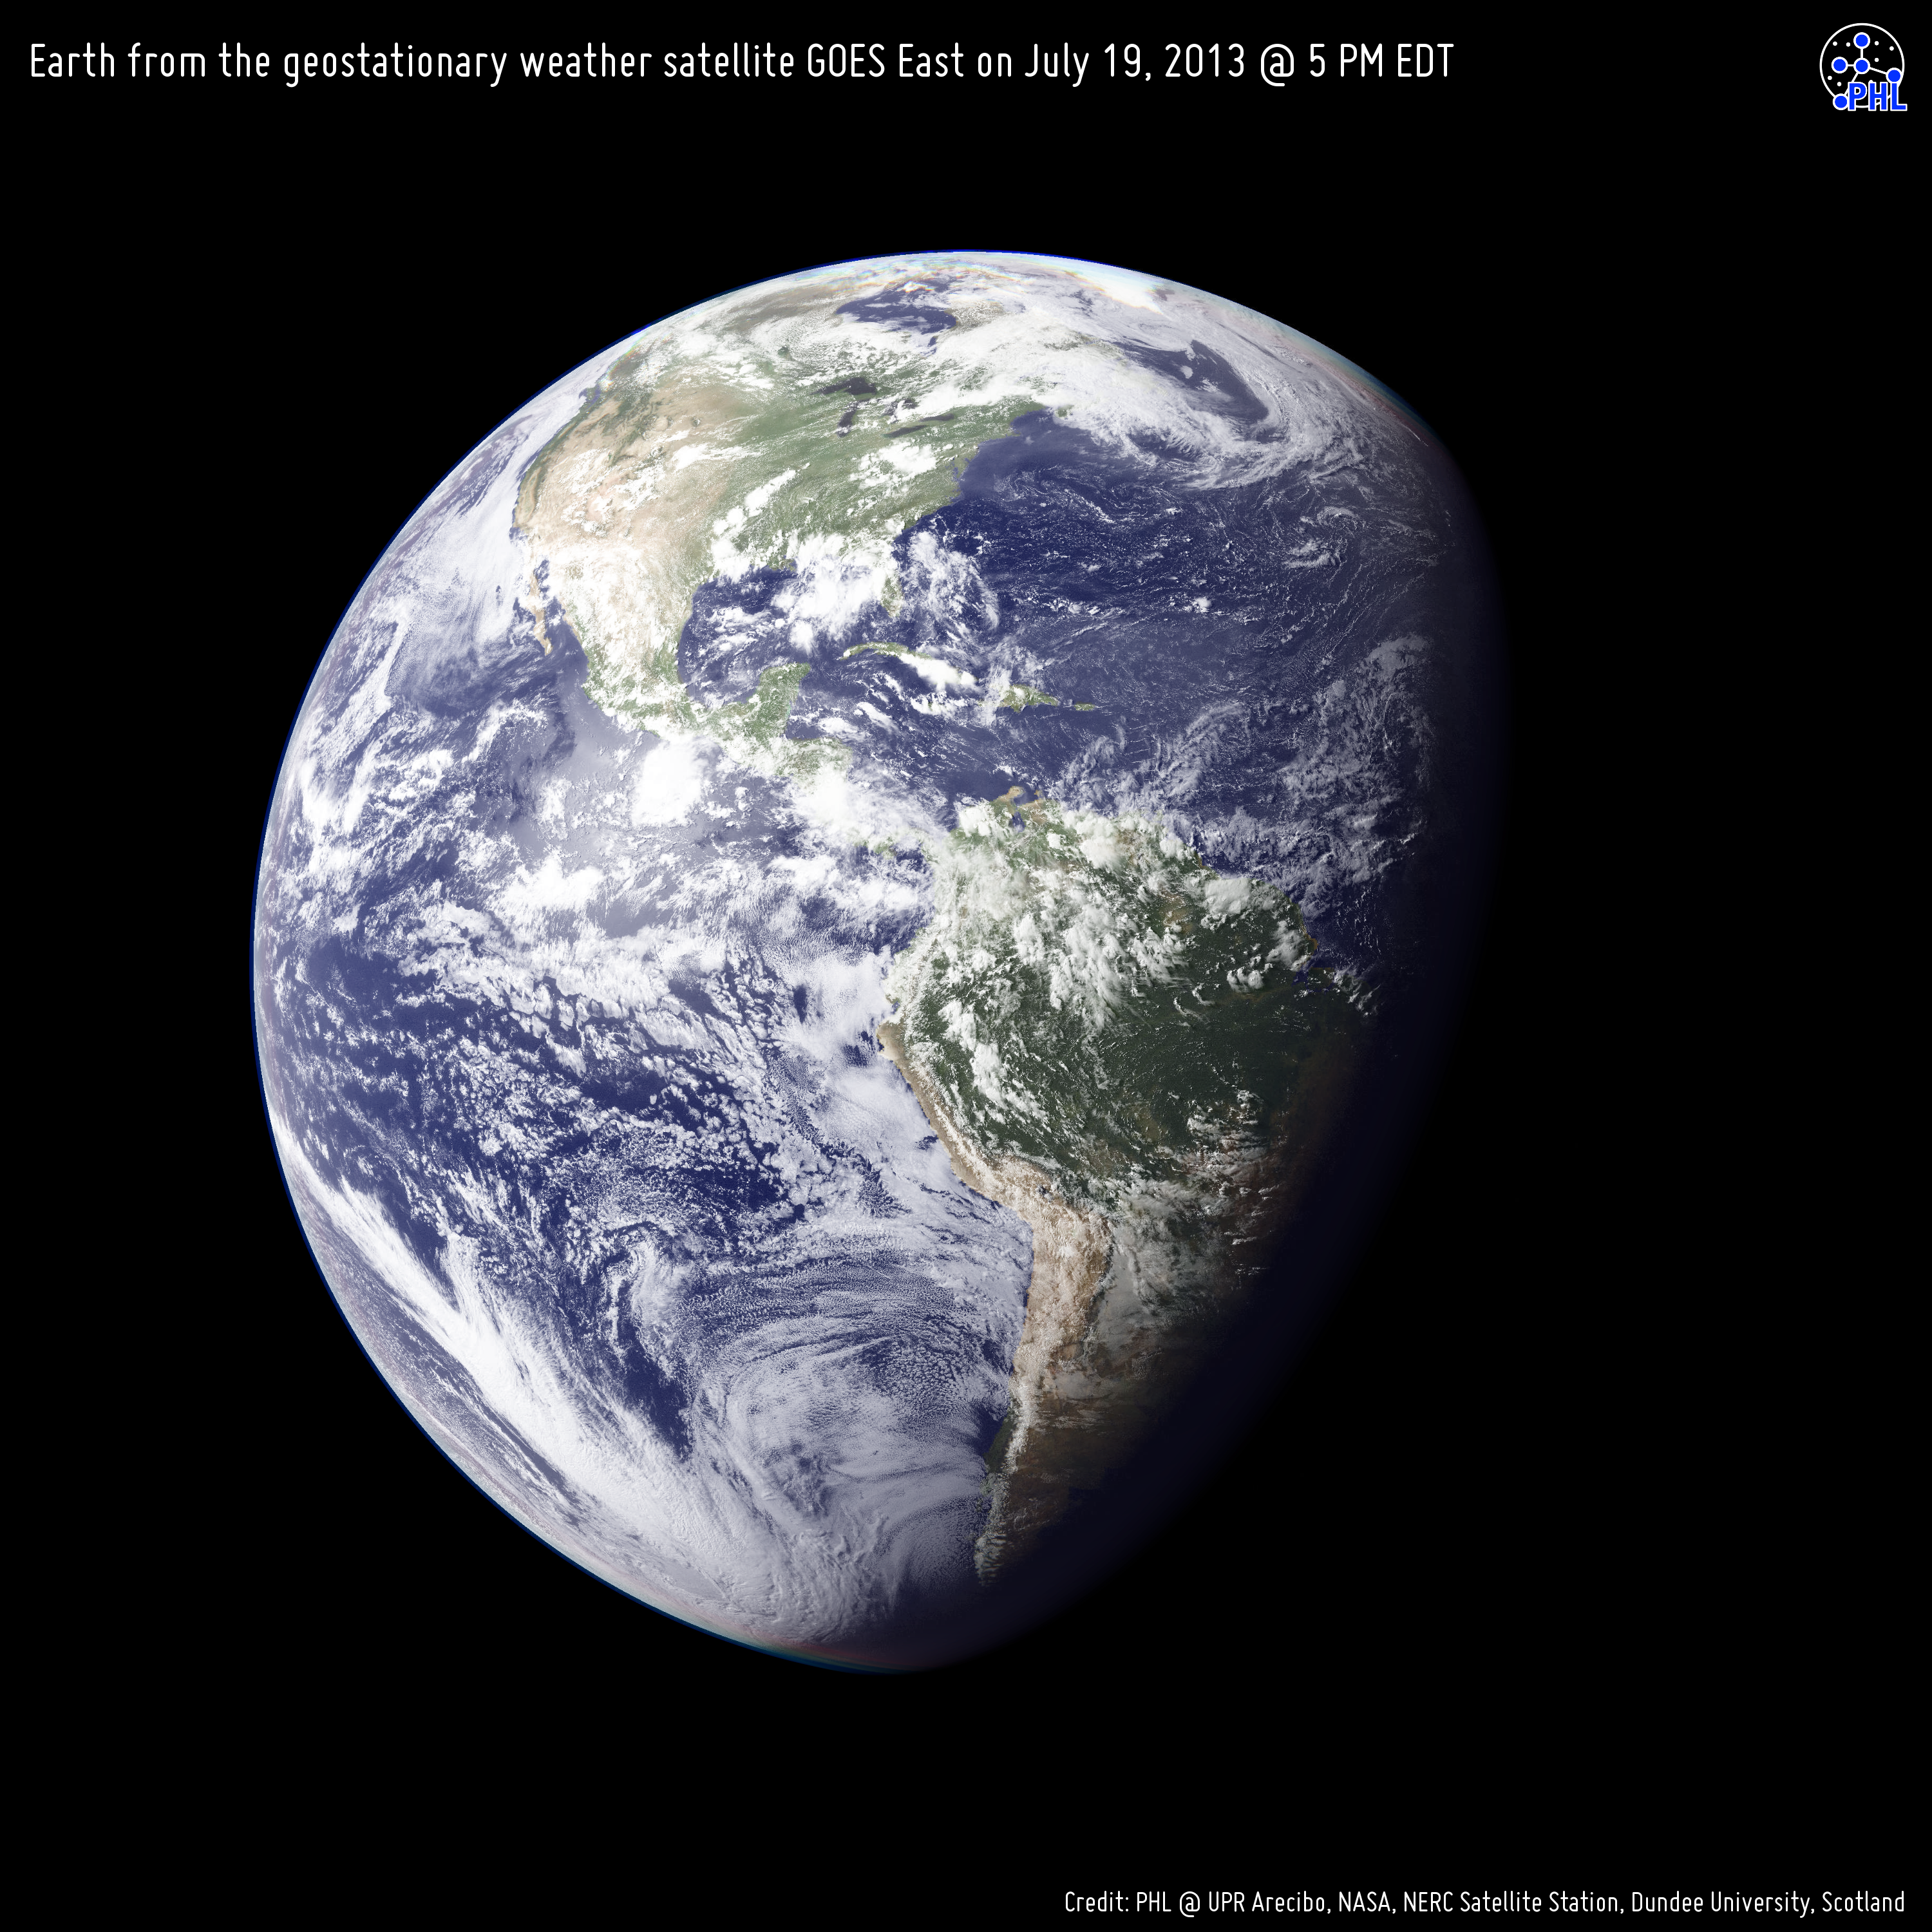 High resolution pictures of earth